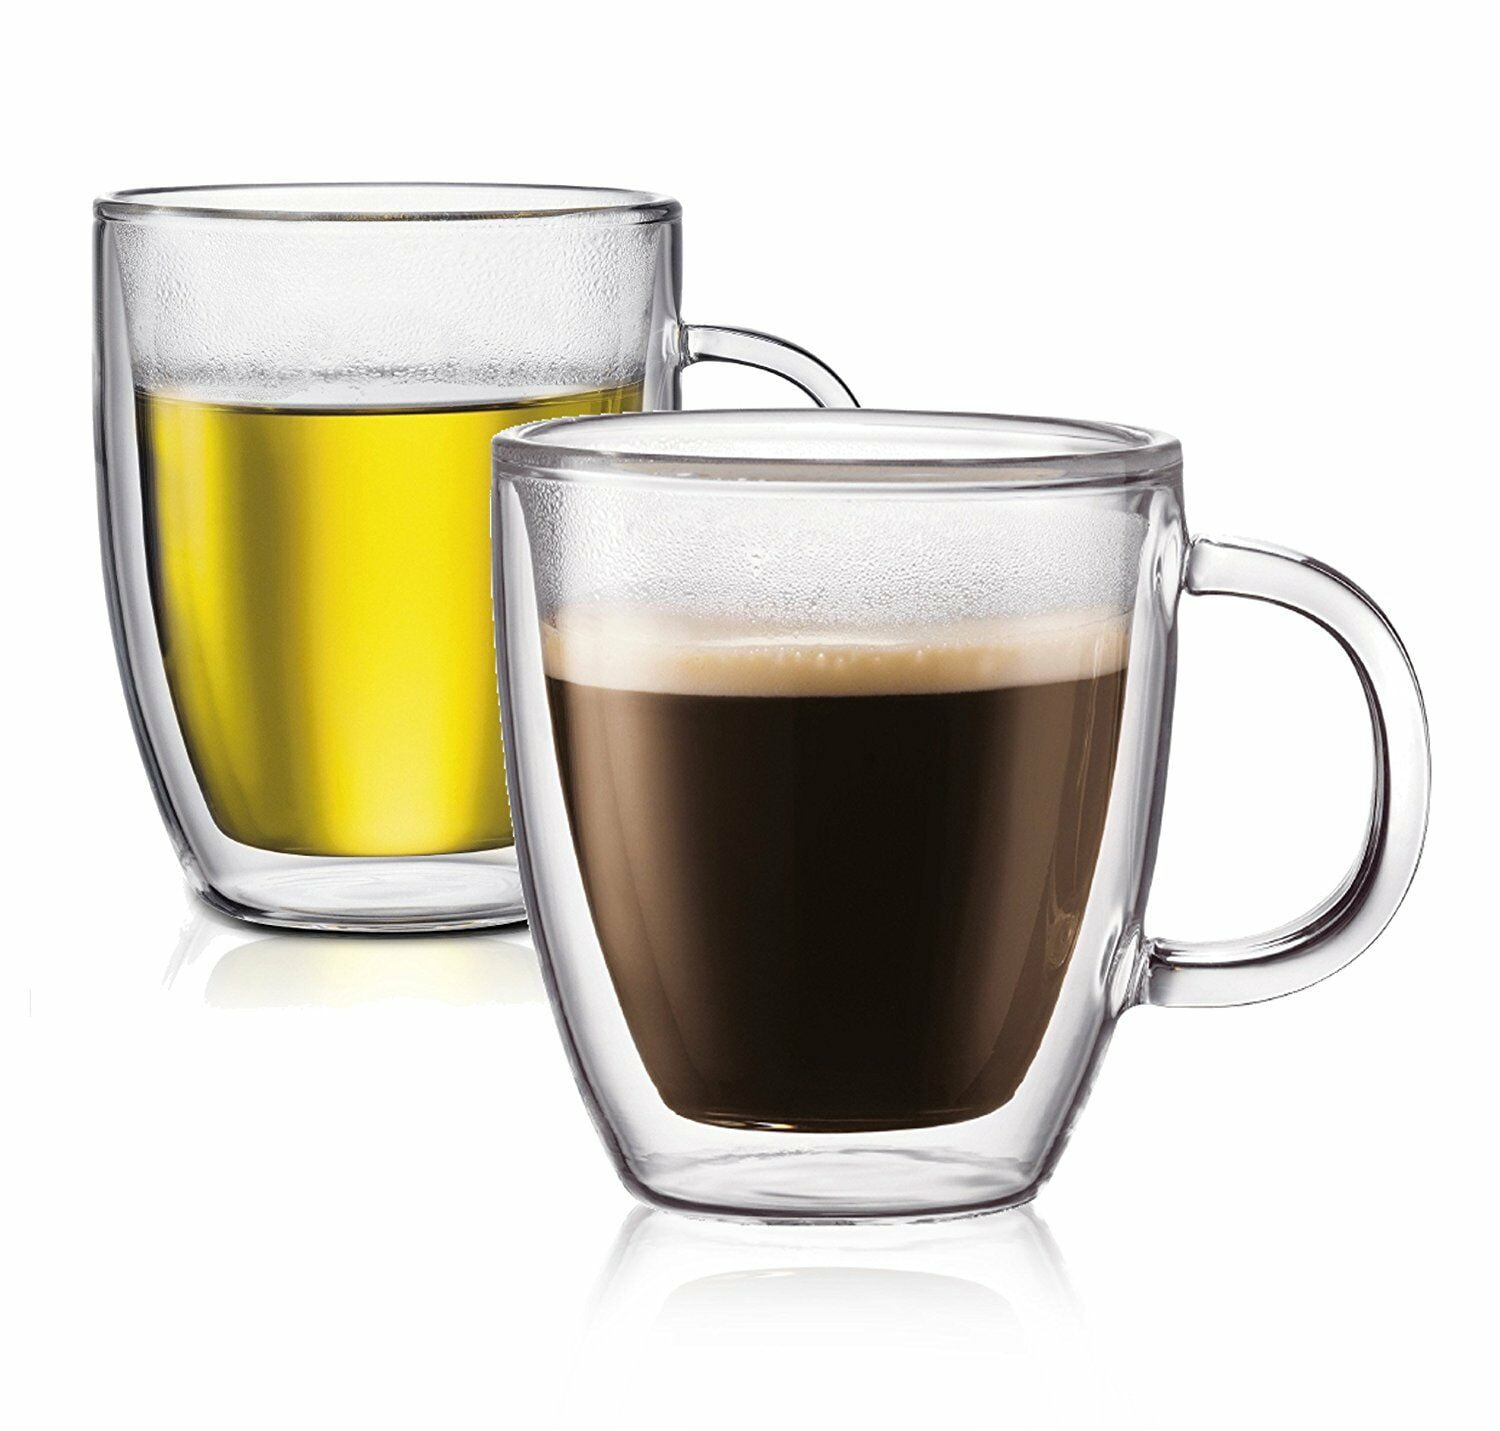 Lemonsoda Double Wall Glass Coffee Mugs Cups (8.5 Fluid ounces) Espresso or Tea Glasses, Insulated Drinking Glasses | Hot and Cold Beverages | Set of